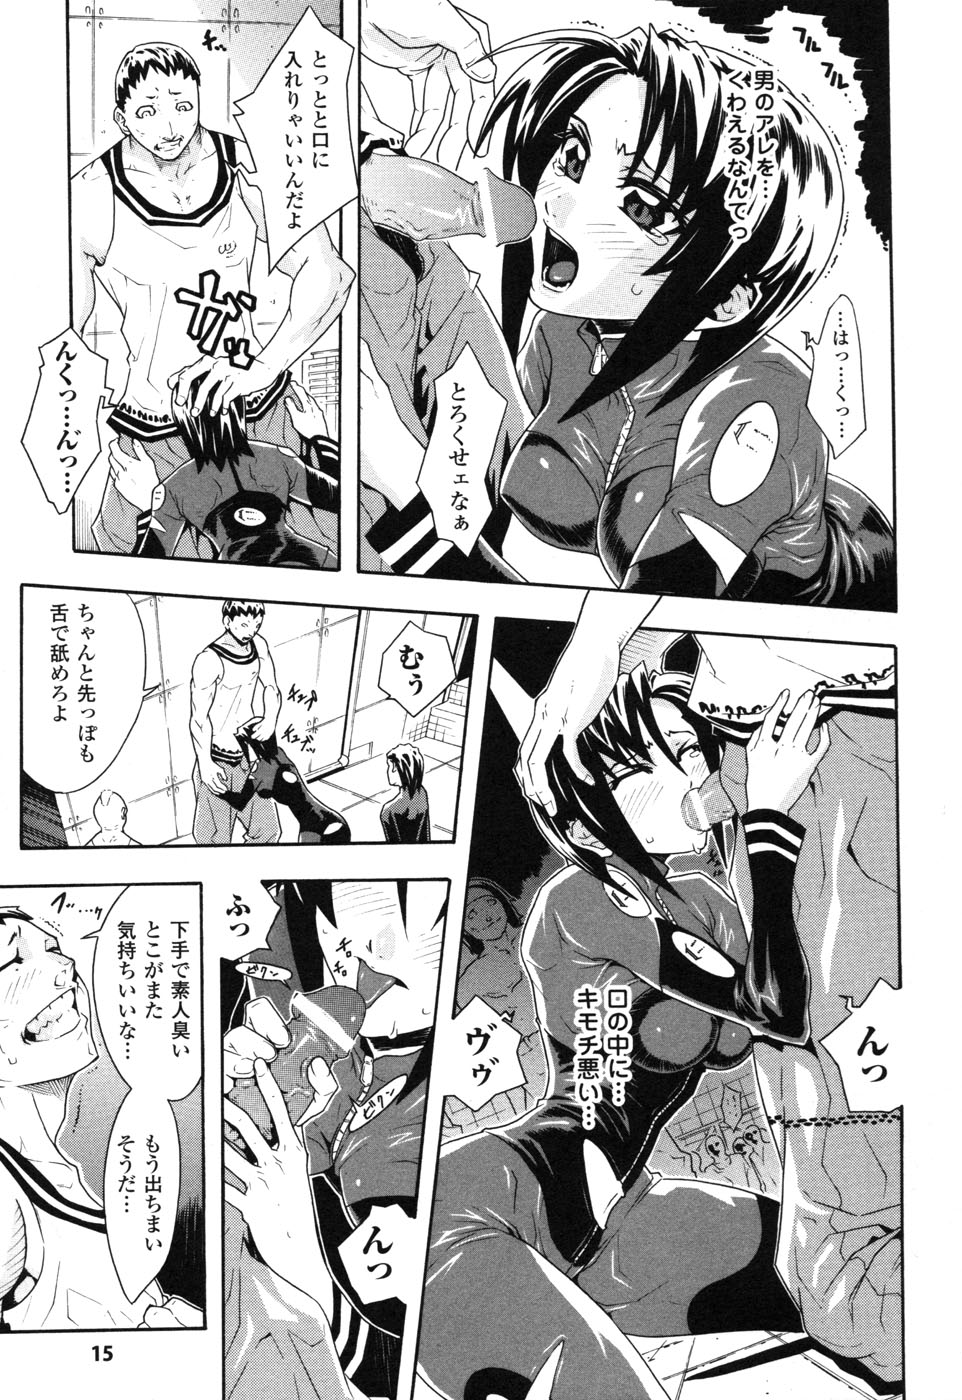 Rider Suit Heroine Anthology Comics 2 page 17 full